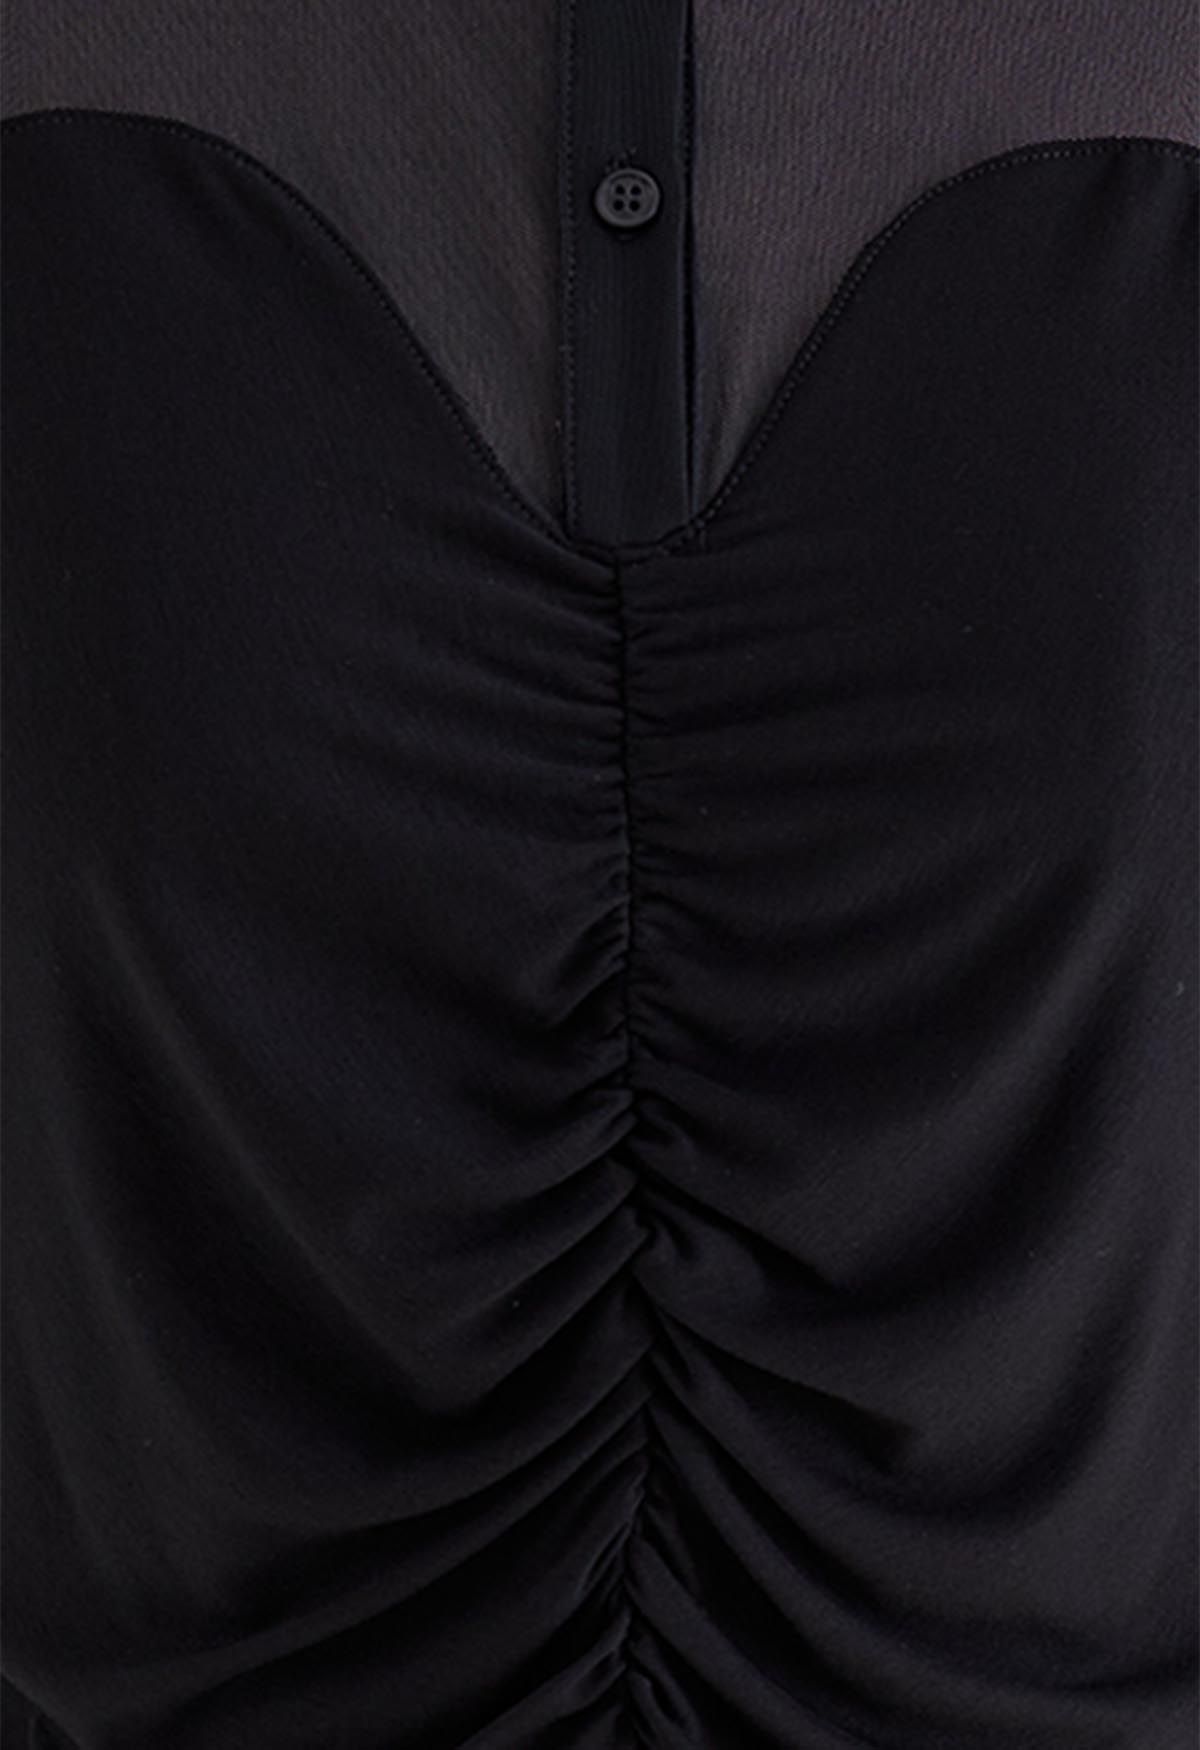 Pointed Collar Soft Mesh Spliced Ruched Top in Black